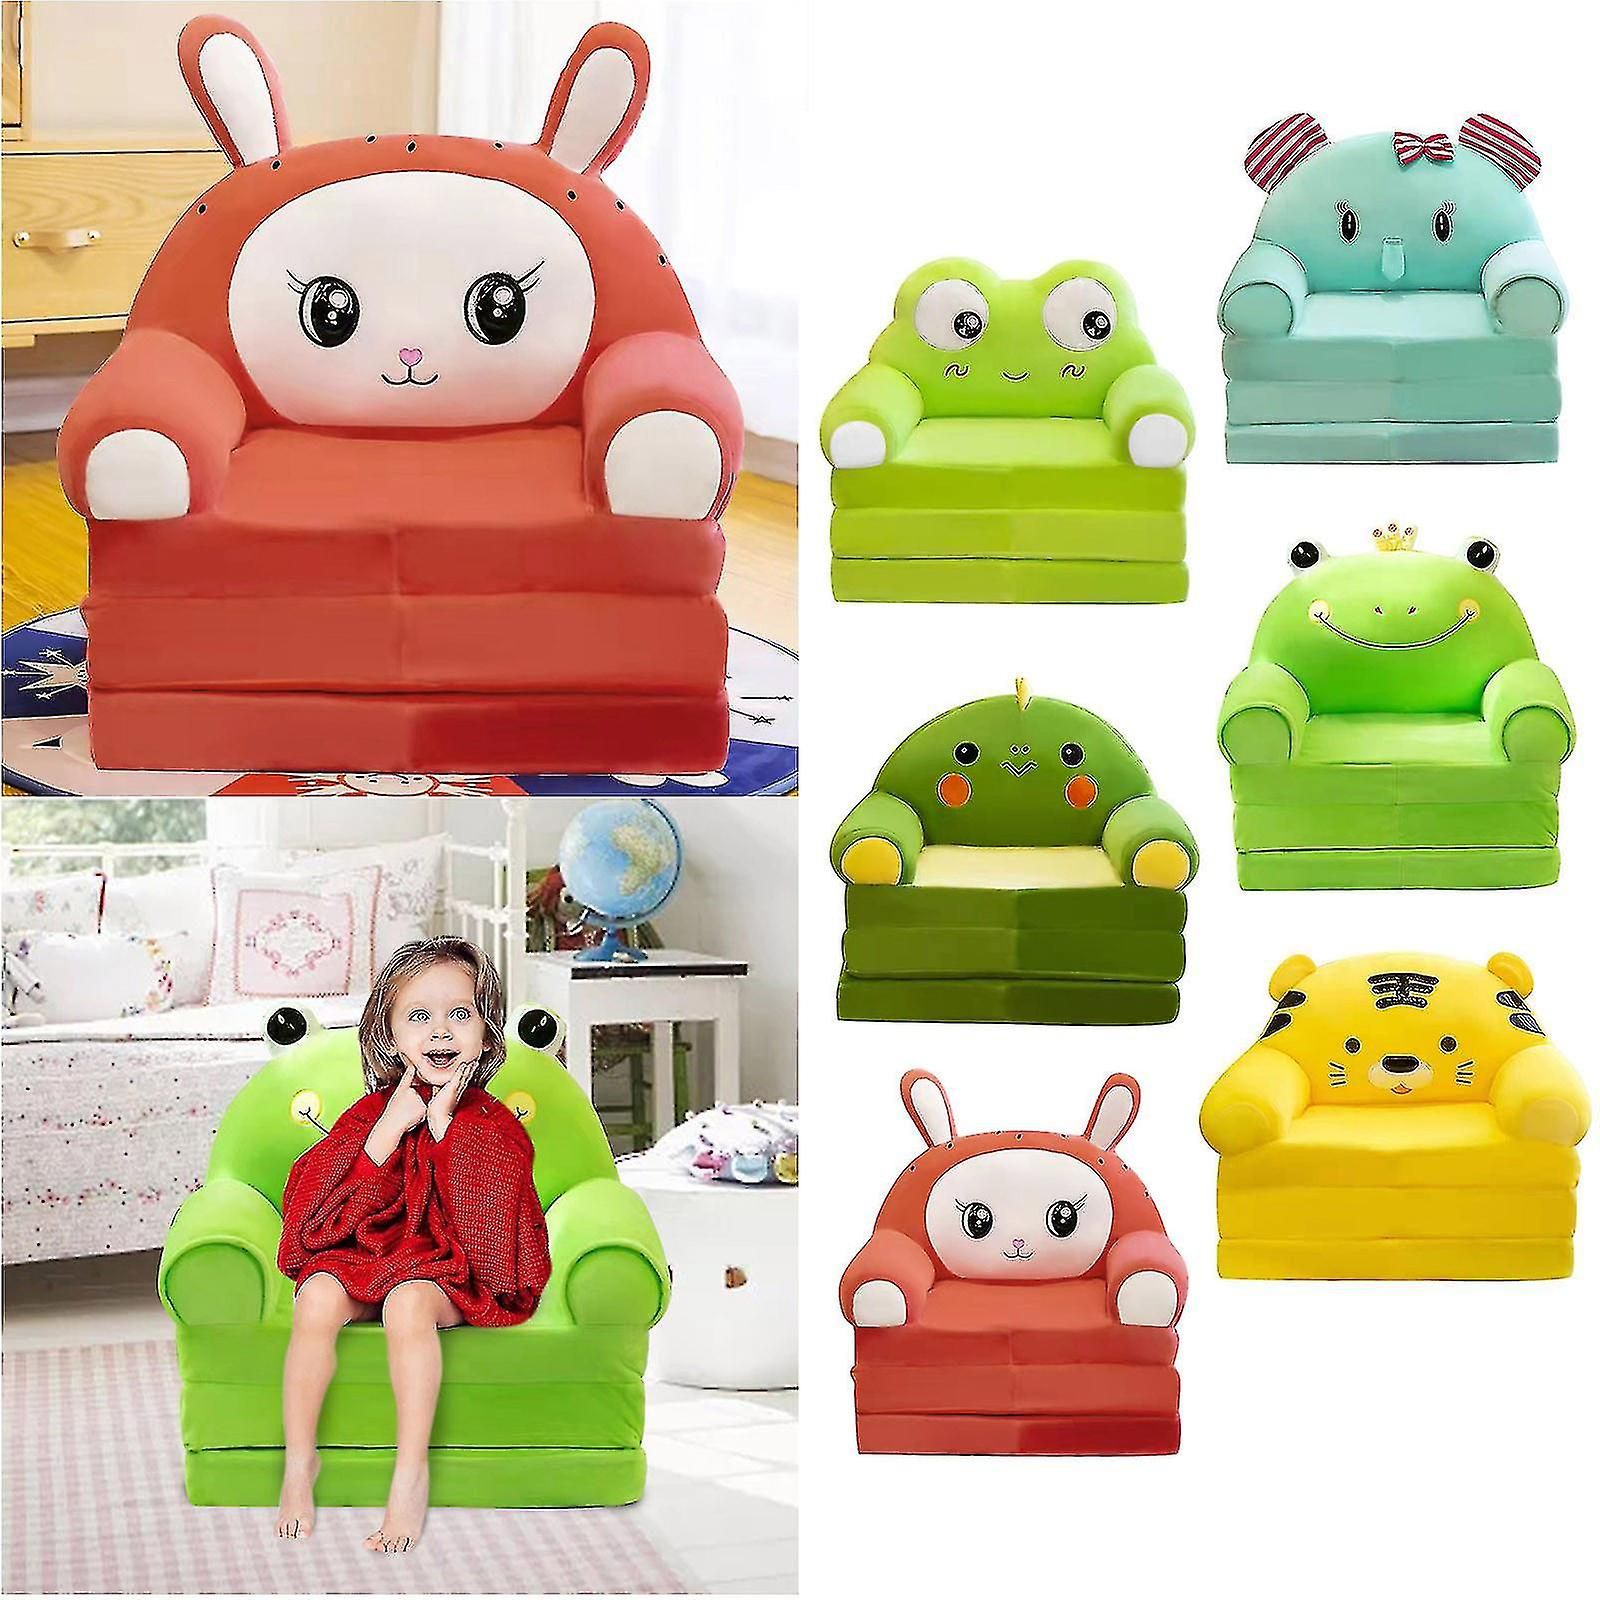 Hot 2023 2 In 1 Plush Foldable Kids Sofa Backrest Armchair Foldable  Children Sofa Cute Best Seller | Fruugo No Throughout 2 In 1 Foldable Sofas (View 15 of 15)